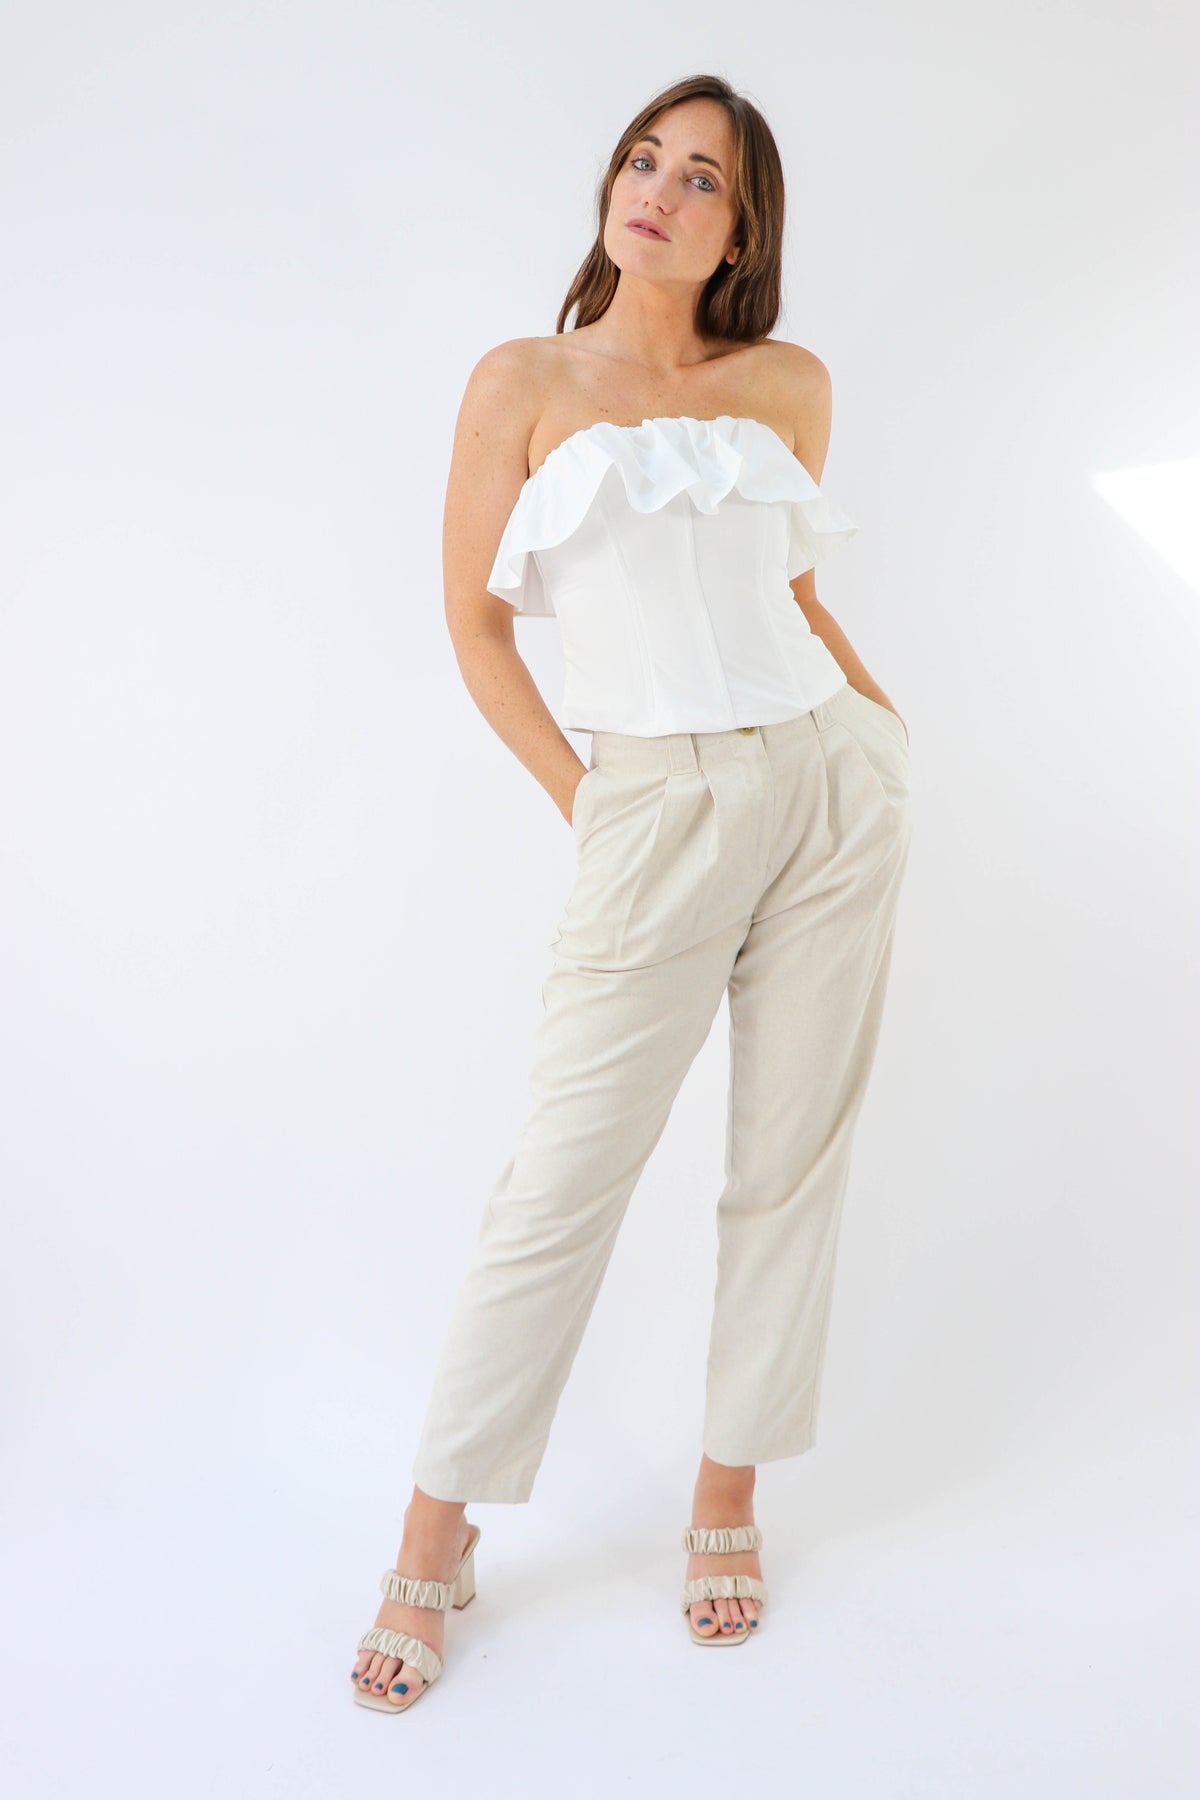 White Ruffle Tube Top | Sweetest Stitch Online Boutique for Women